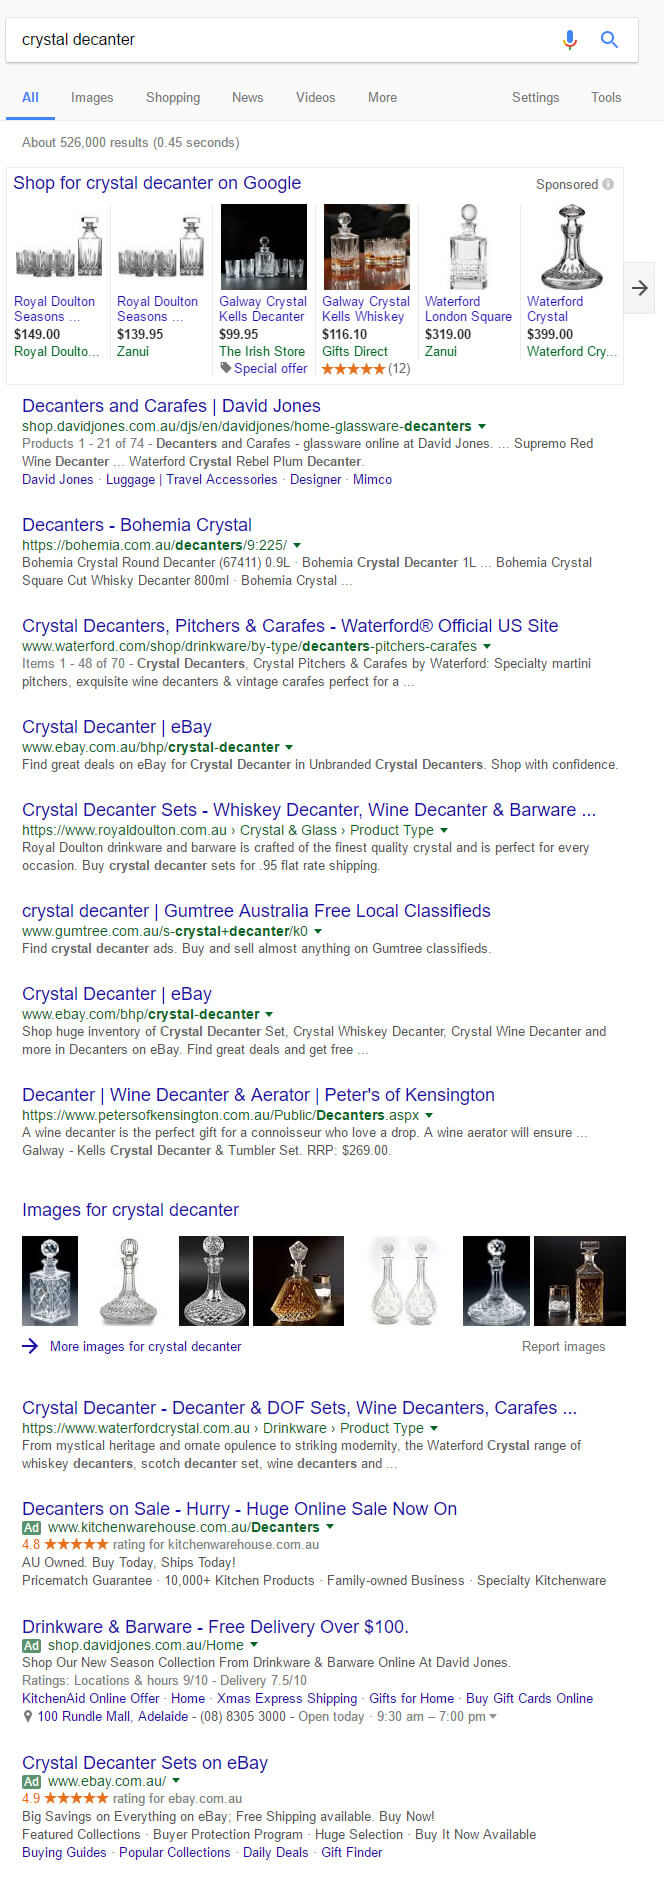 SERP Formation for crystal decanter